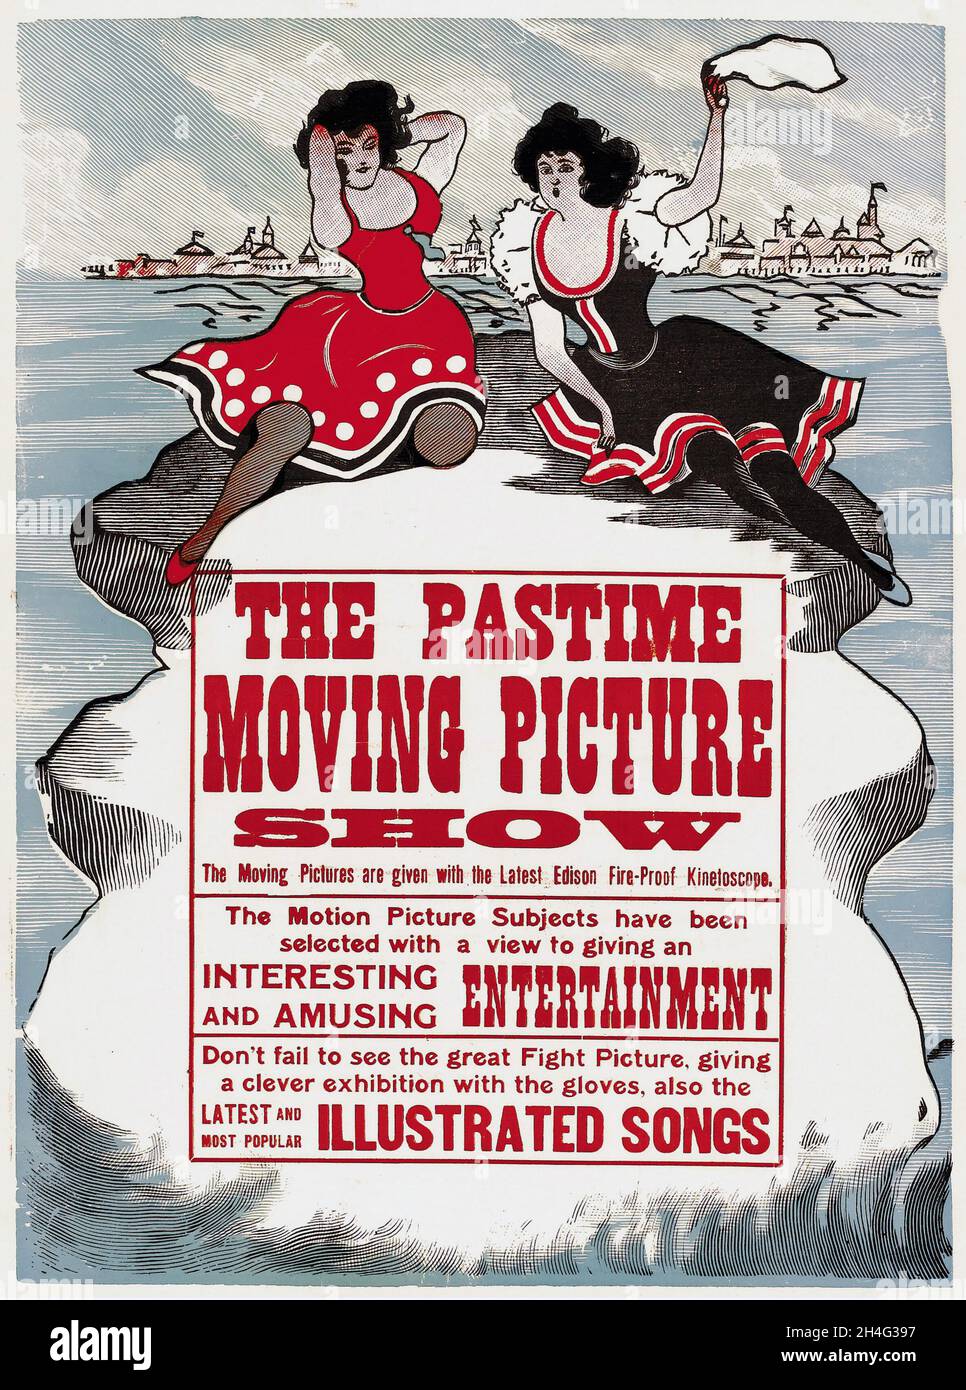 Edison Poster (ca. 1900). The Pastime Moving Picture Show - Entertainment - Illustrated songs. Stock Photo